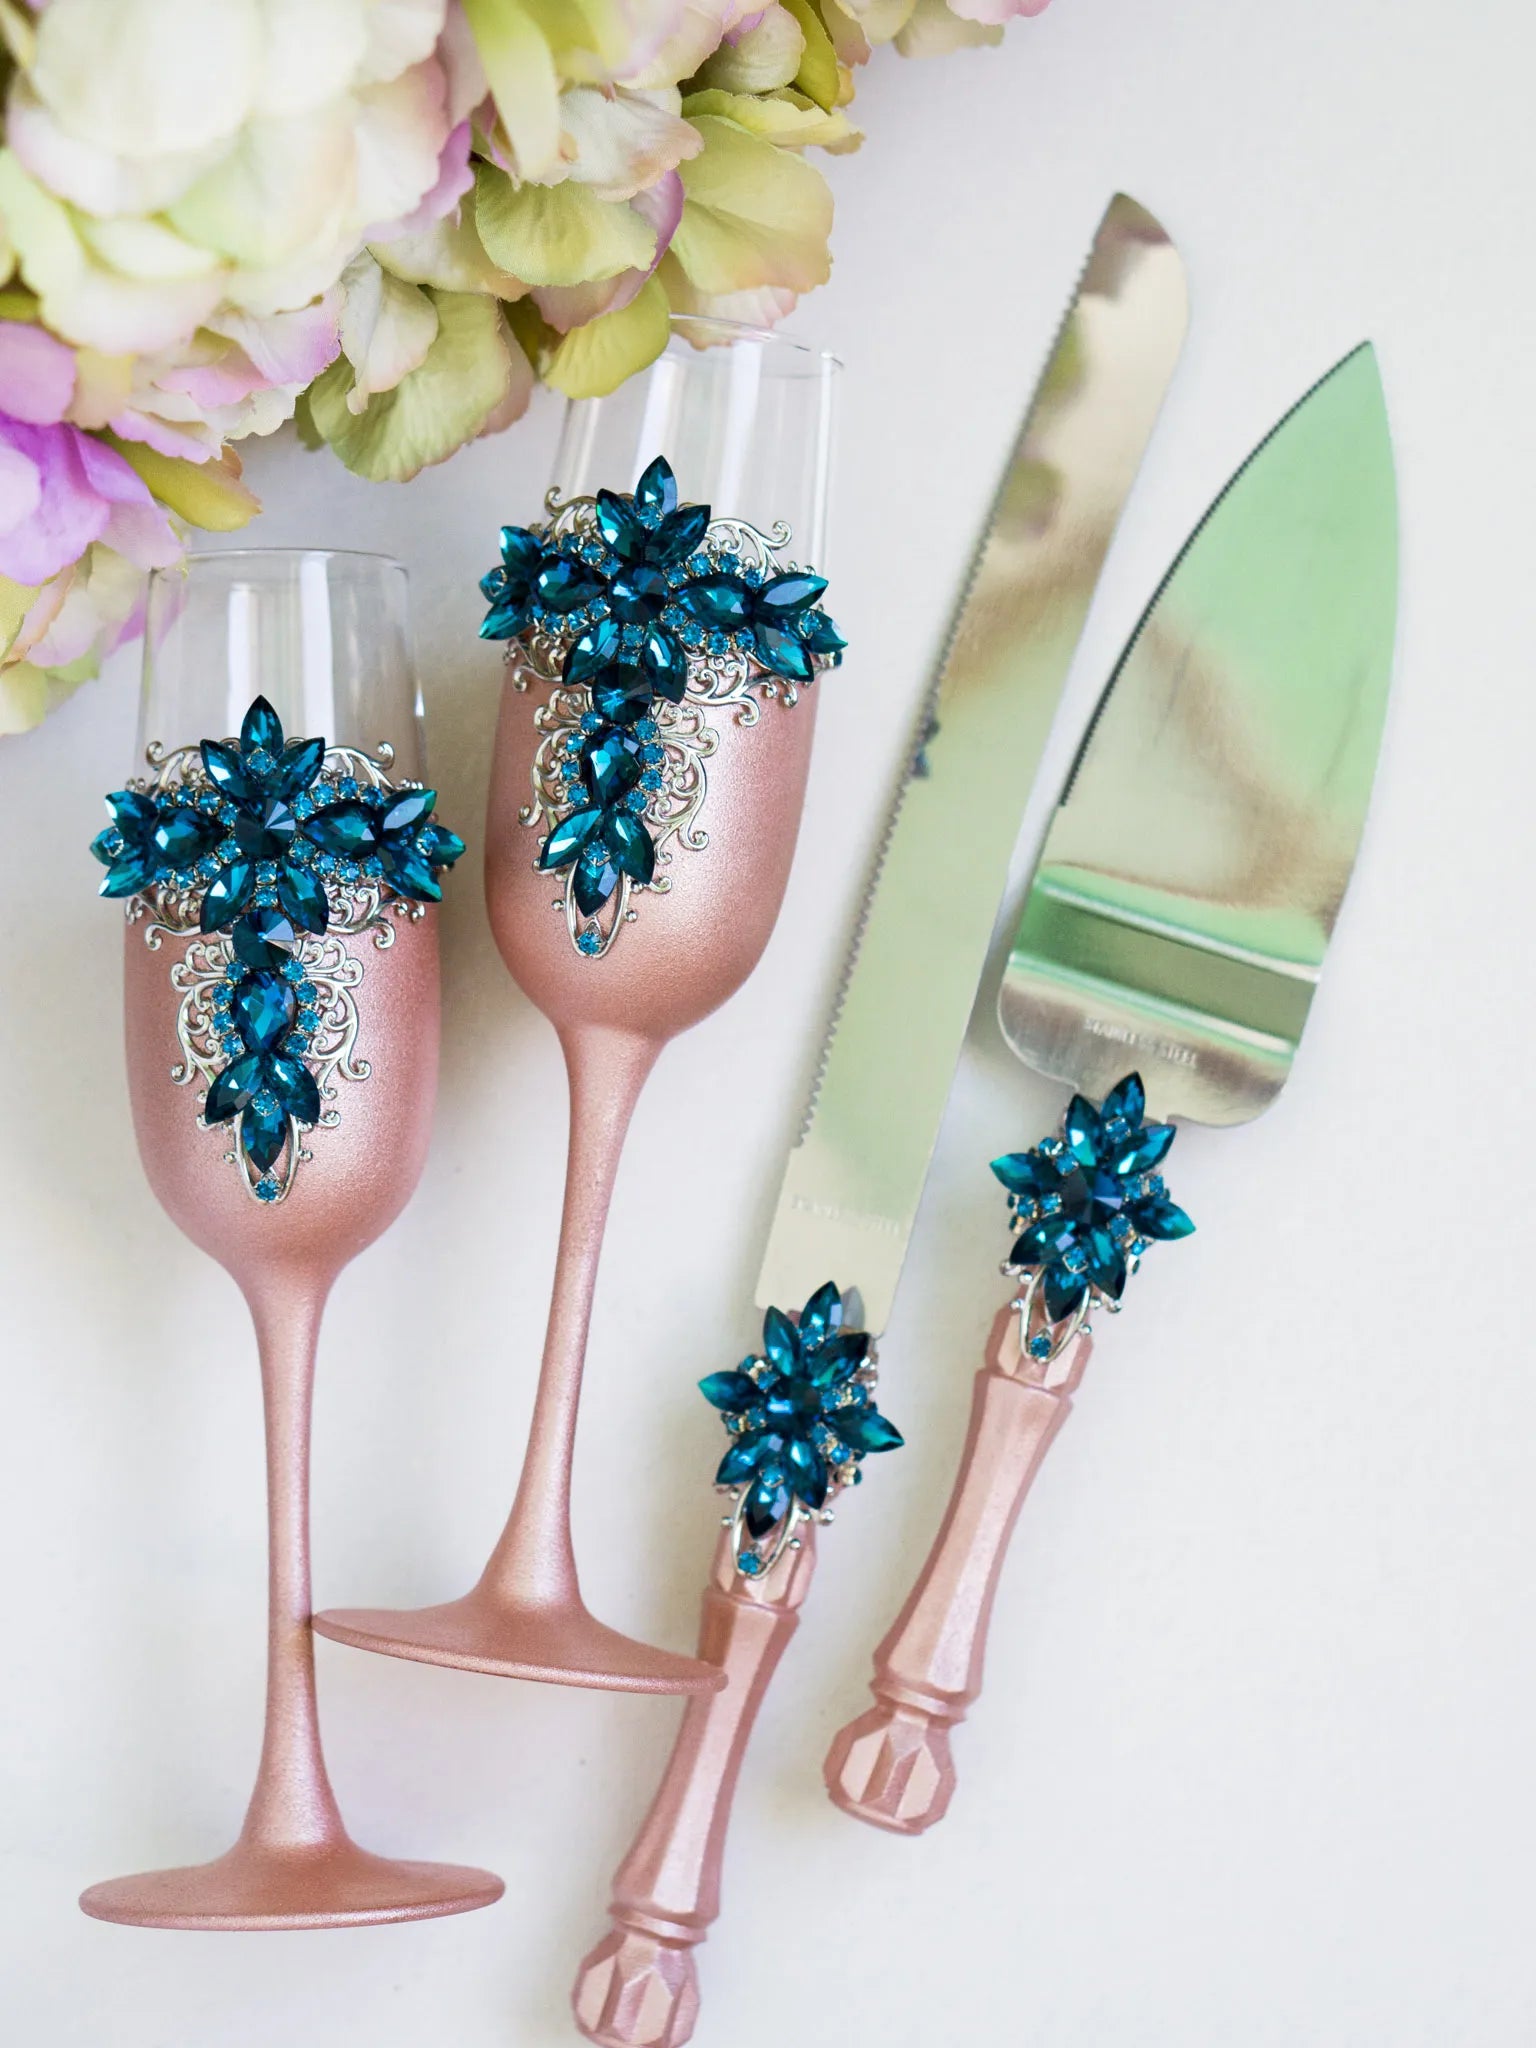 Rose Gold Metallic Champagne Glasses and Cake Serving Set